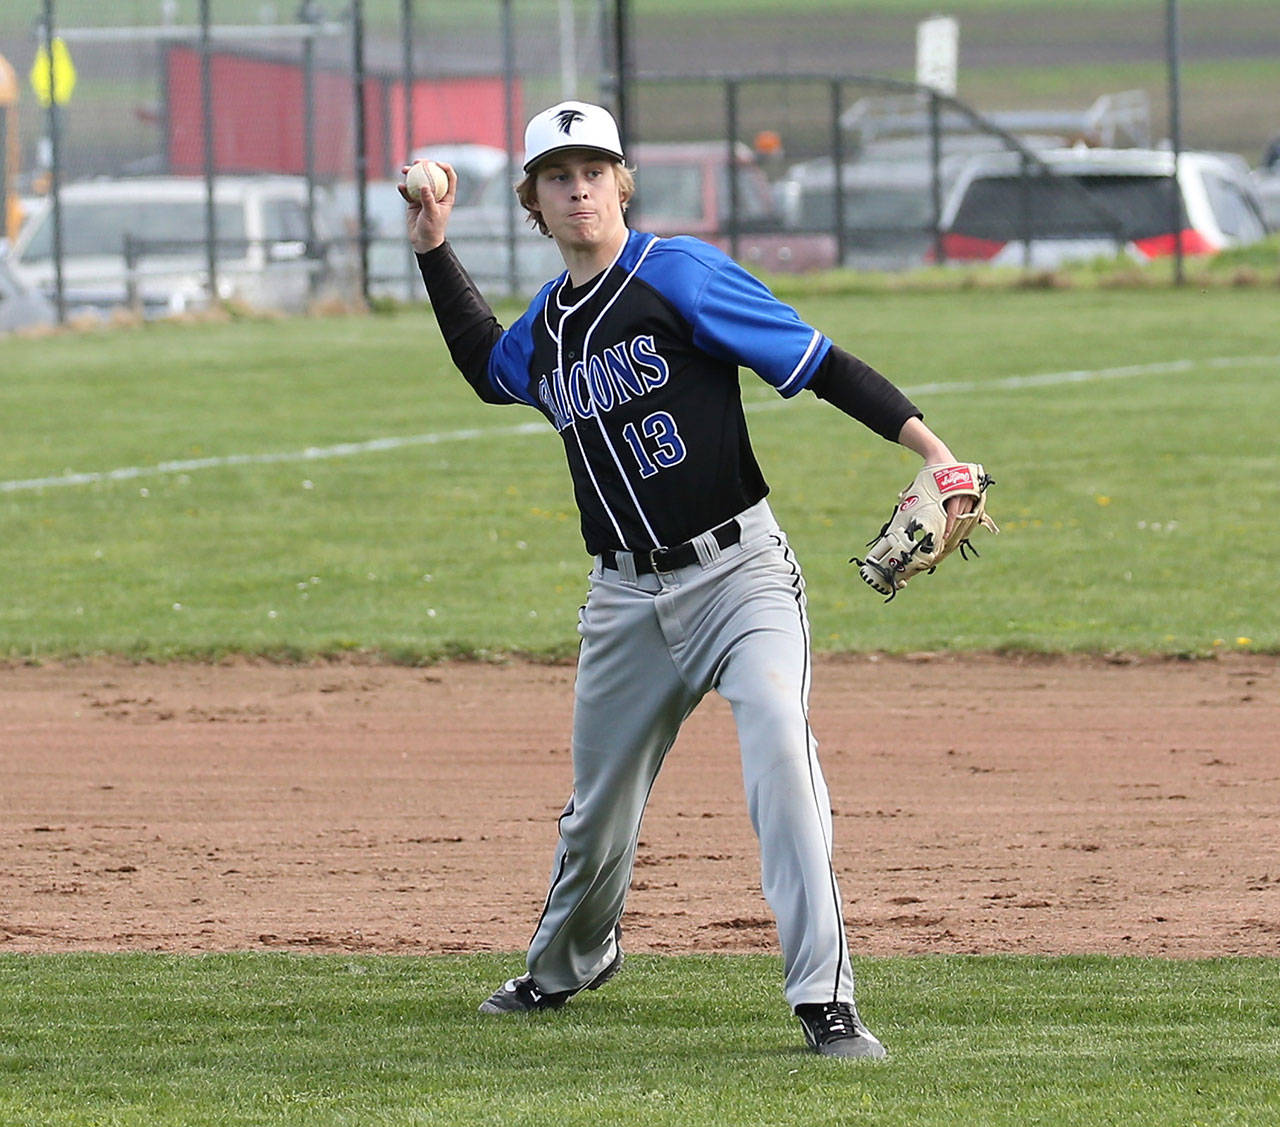 Third baseman Drew Fry throws to first for an out.(Photo by John Fisken)